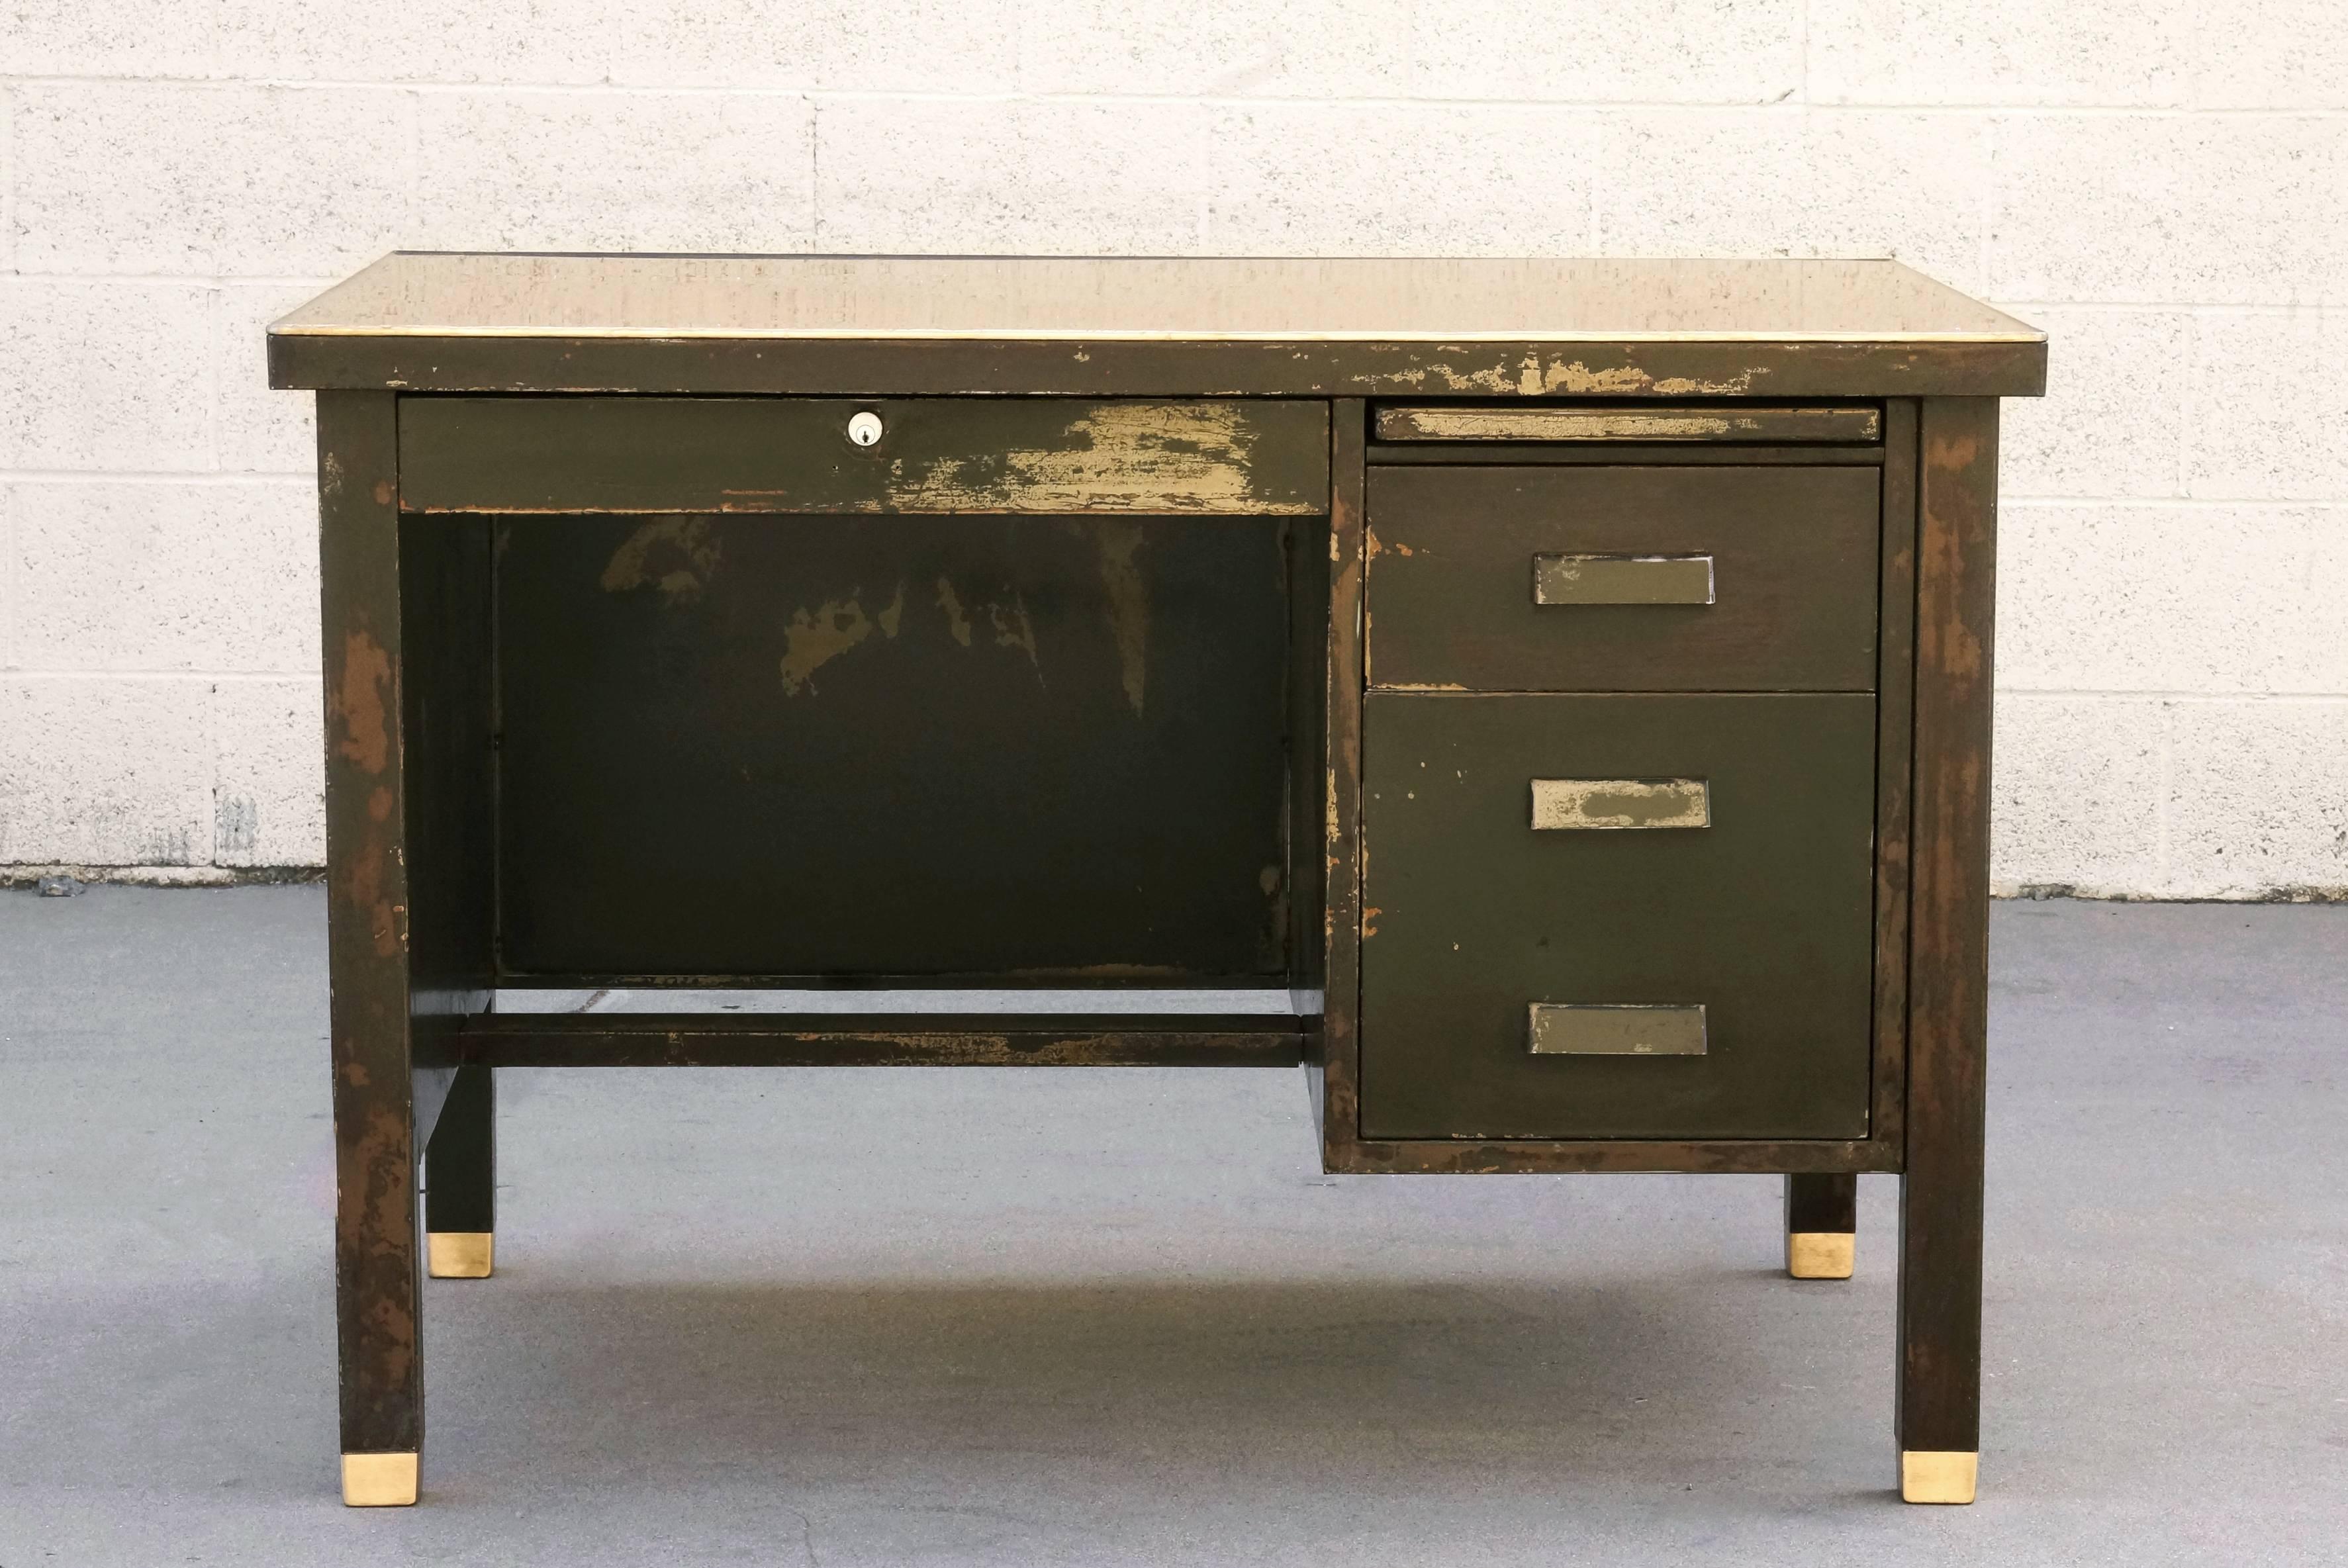 Very early model single pedestal tanker desk by General Fireproofing, circa 1920s. Its incredible patina is a combination of several layers of paint distressed over decades. Features refinished desktop with 1/8